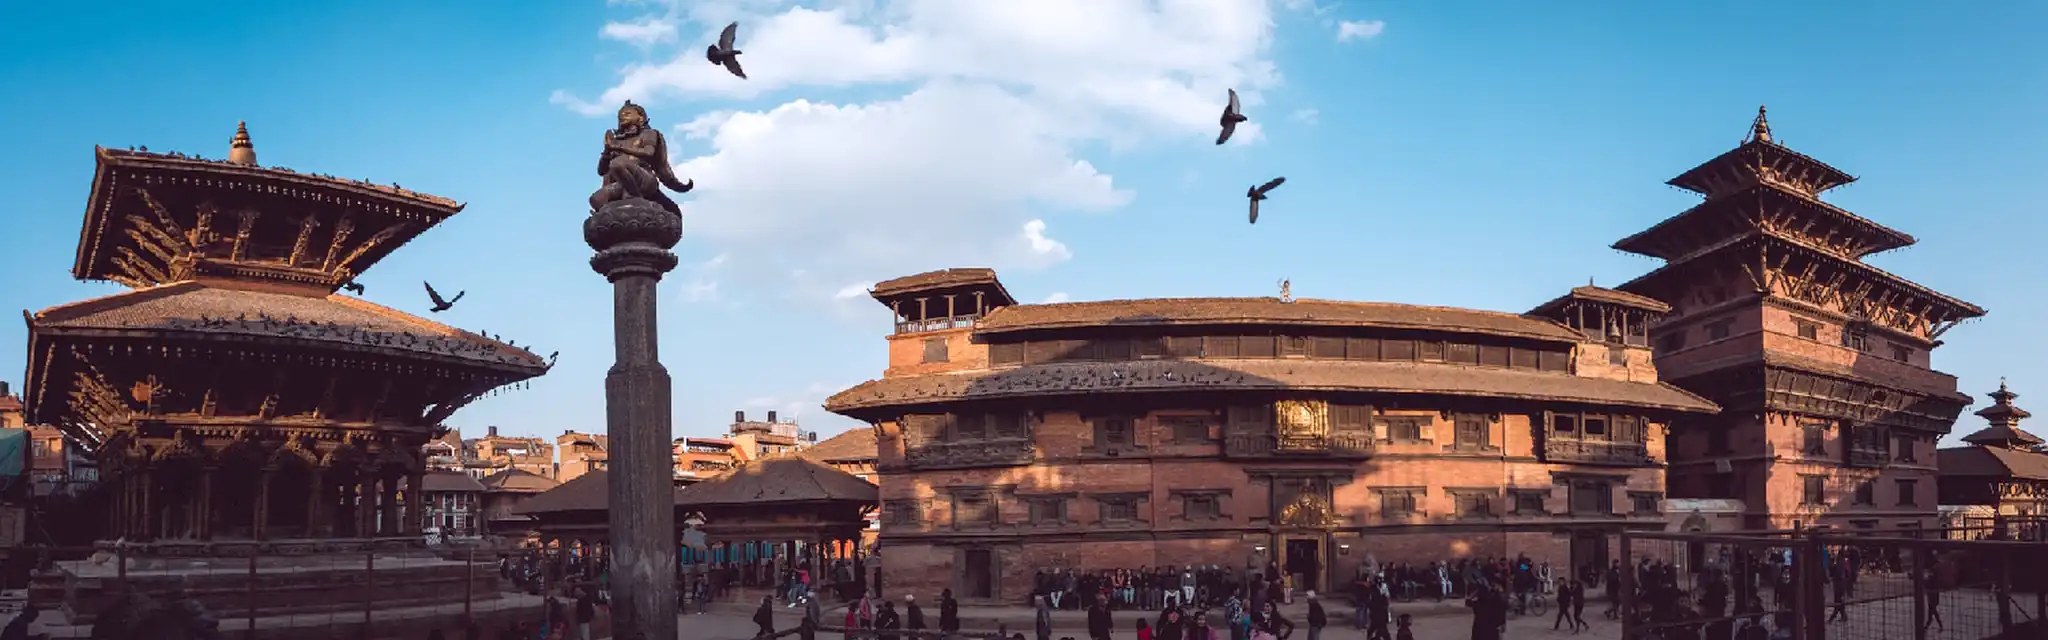 Patan Durbar Square- Unmissable World Heritage Site in Nepal